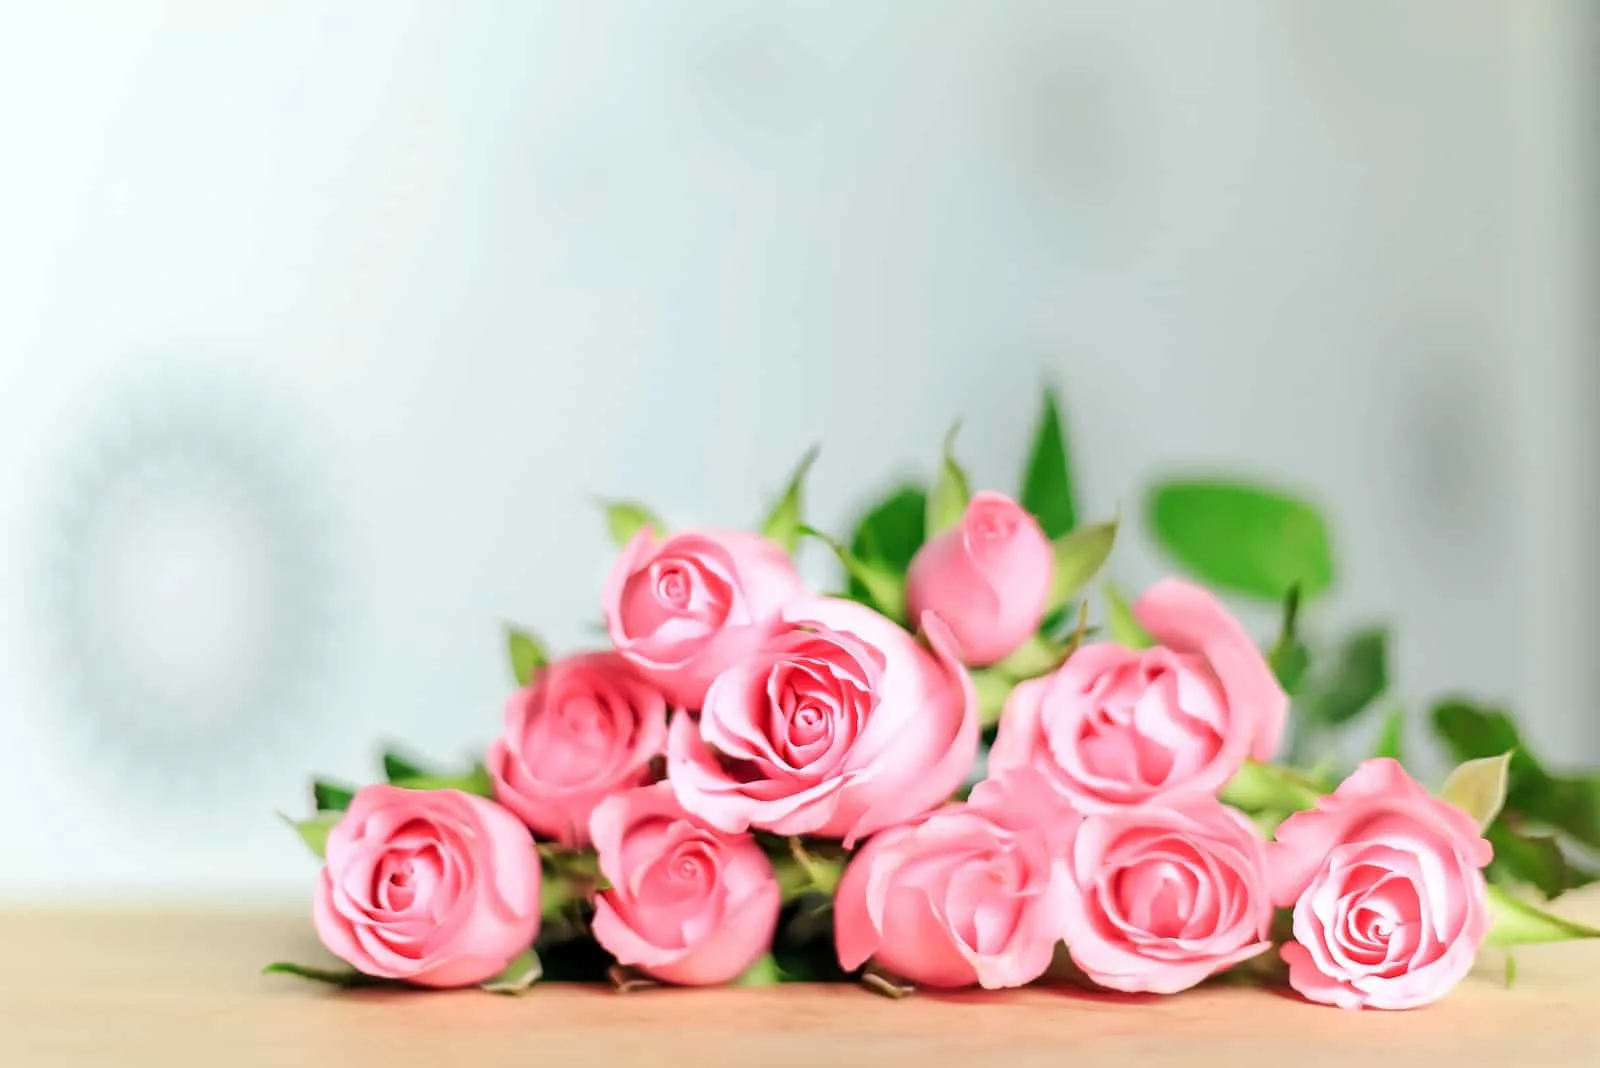 group of pink roses on wooden table